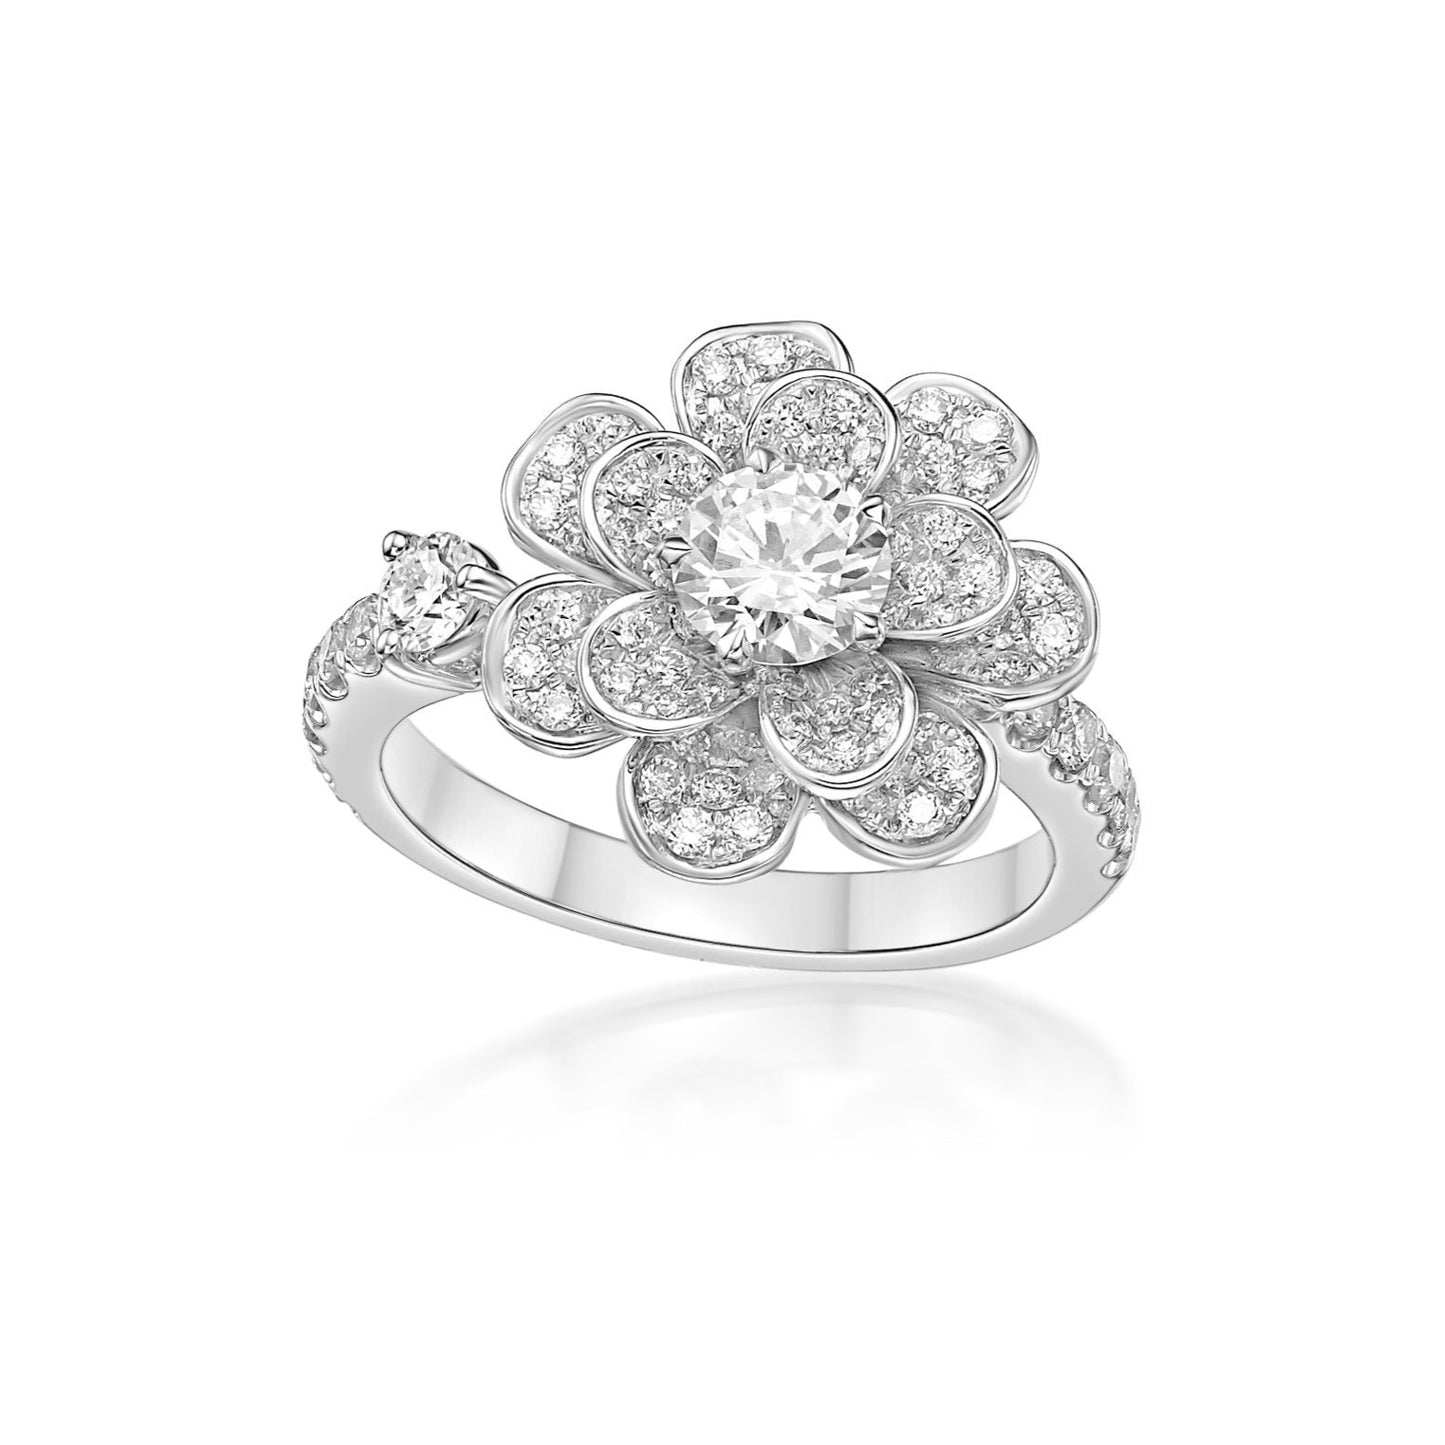 Pave Floral Diamond ring with 50pt Round Brilliant diamond and offset band